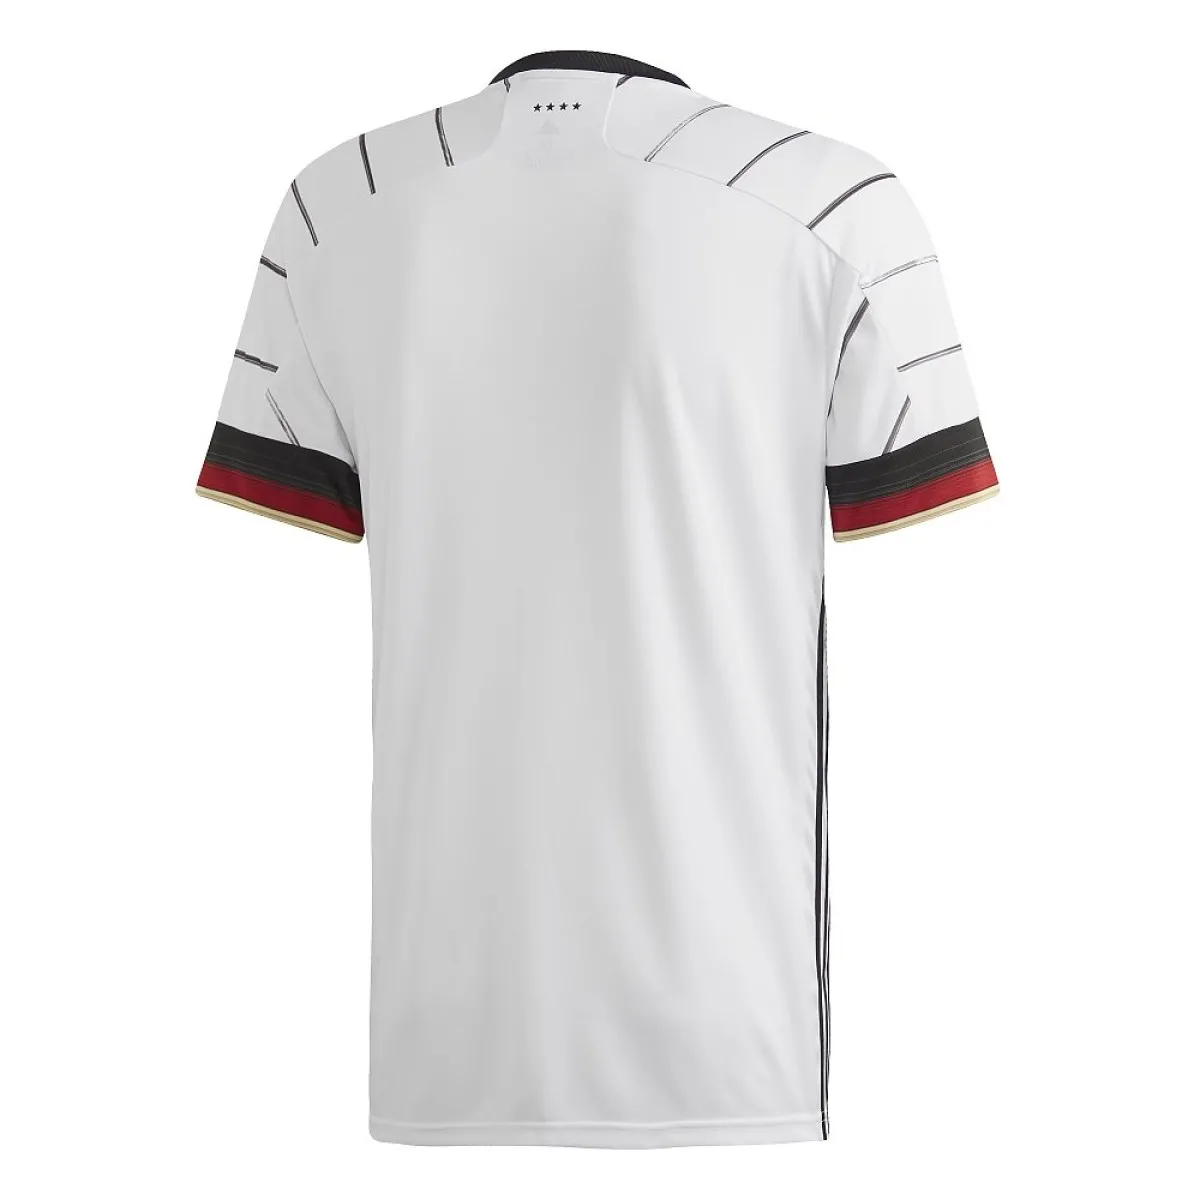 DFB home match jersey adults white